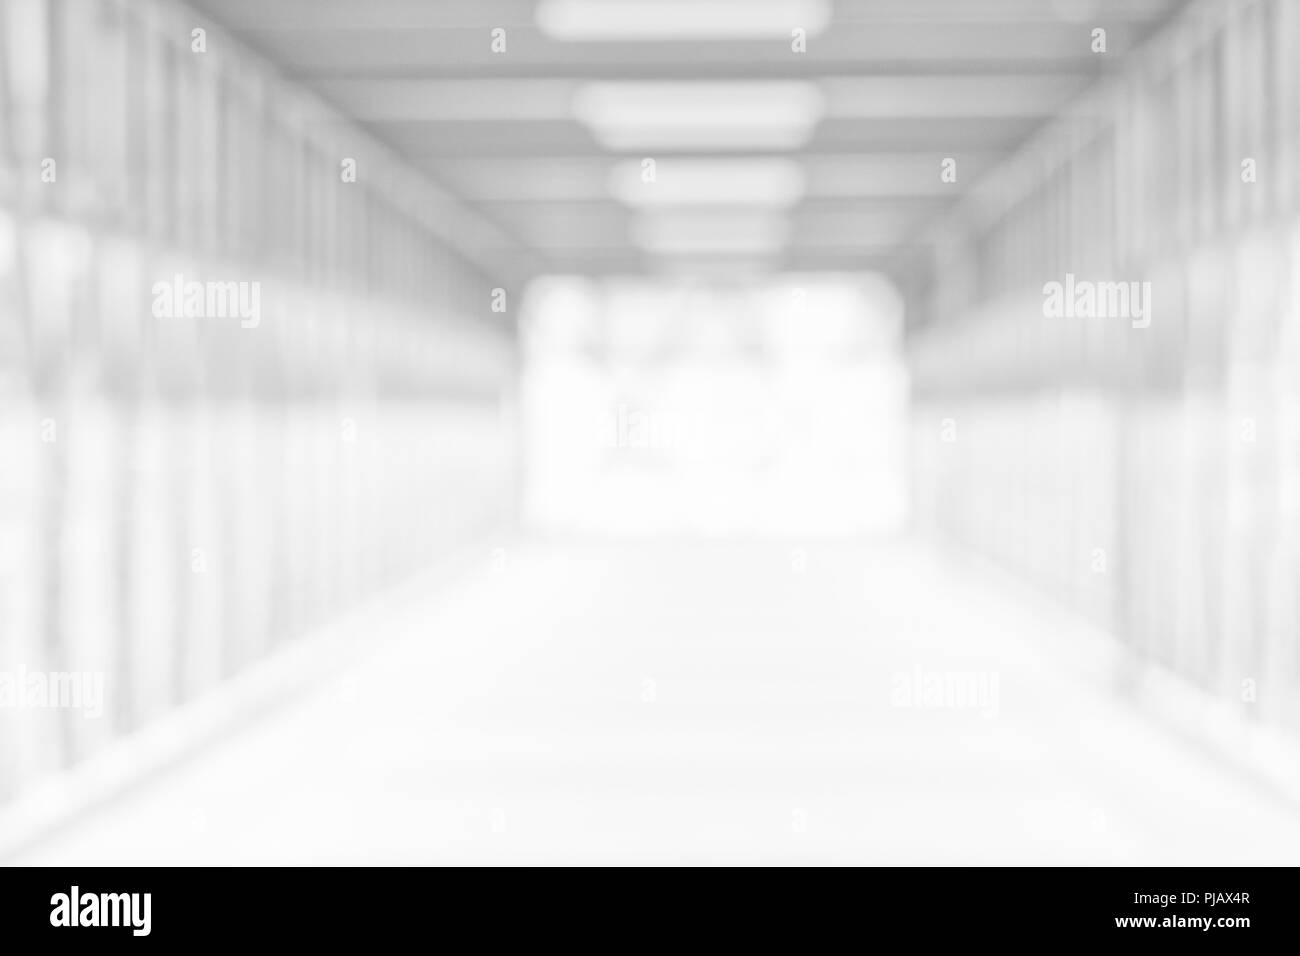 Abstract blurred pathway white grey background for backdrop design, composition for , website, magazine or graphic for commercial campaign design Stock Photo